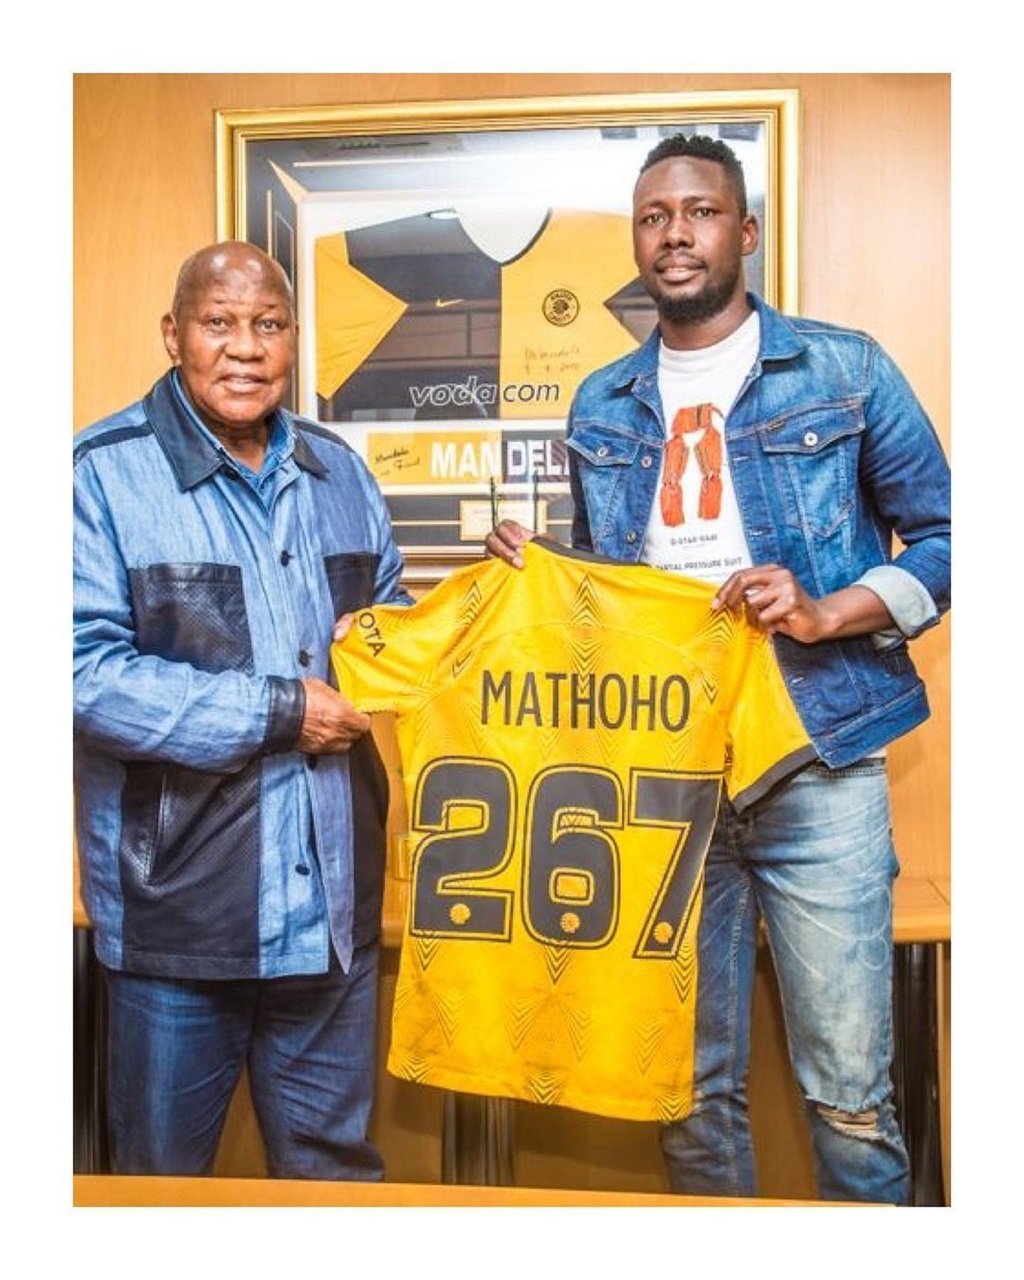 Kaizer Chiefs bid farewell to Eric Mathoho yesterday with a special event at Naturena.